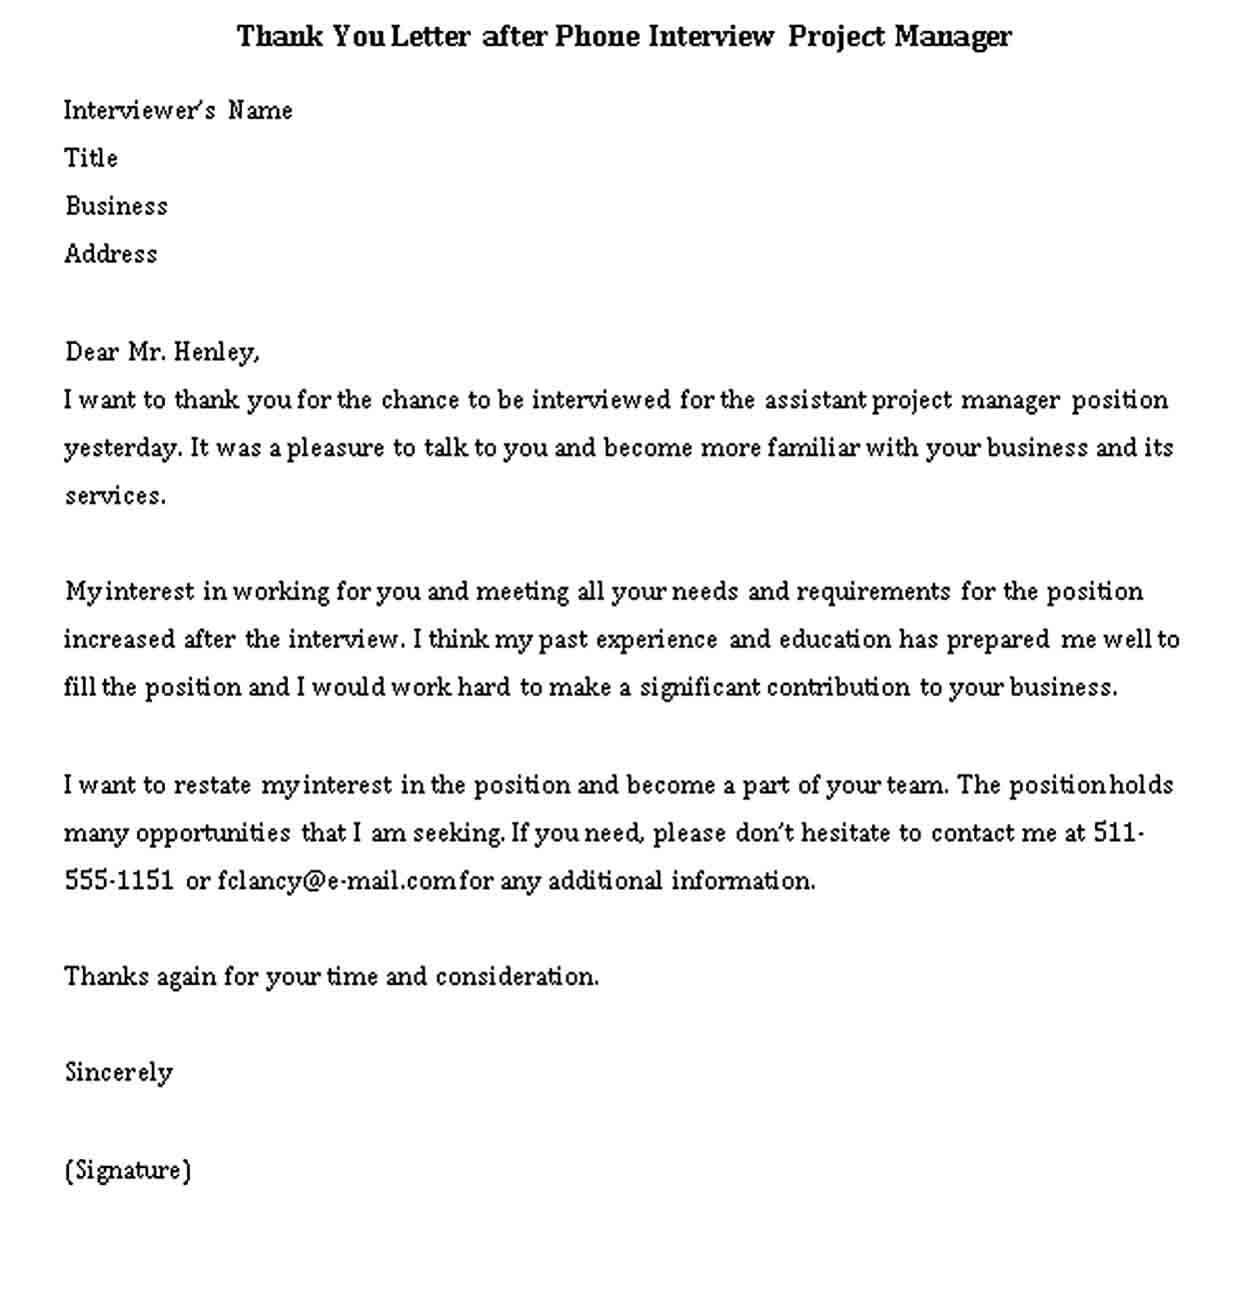 Thank You Letter after Phone Interview Project Manager